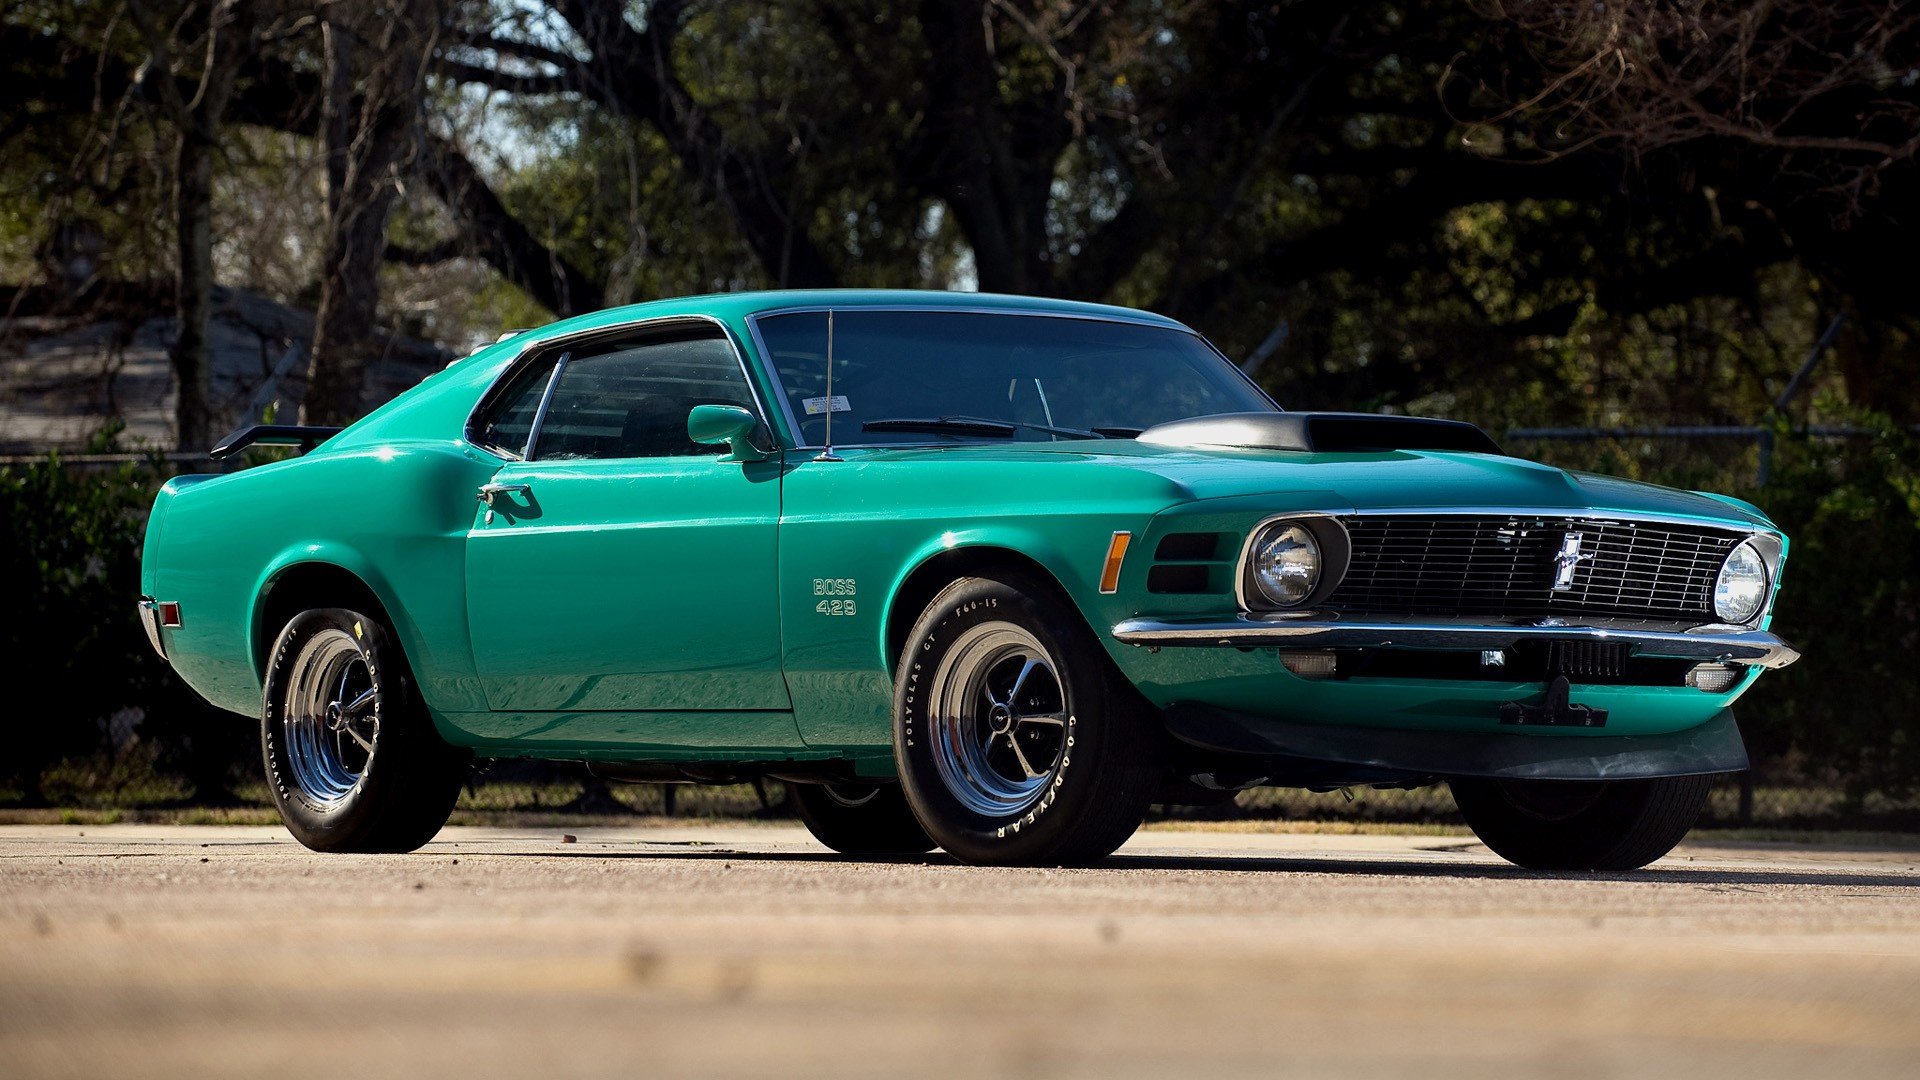 cars, Muscle, Cars, Boss, Vehicles, Ford, Mustang, Classic, Cars Wallpaper